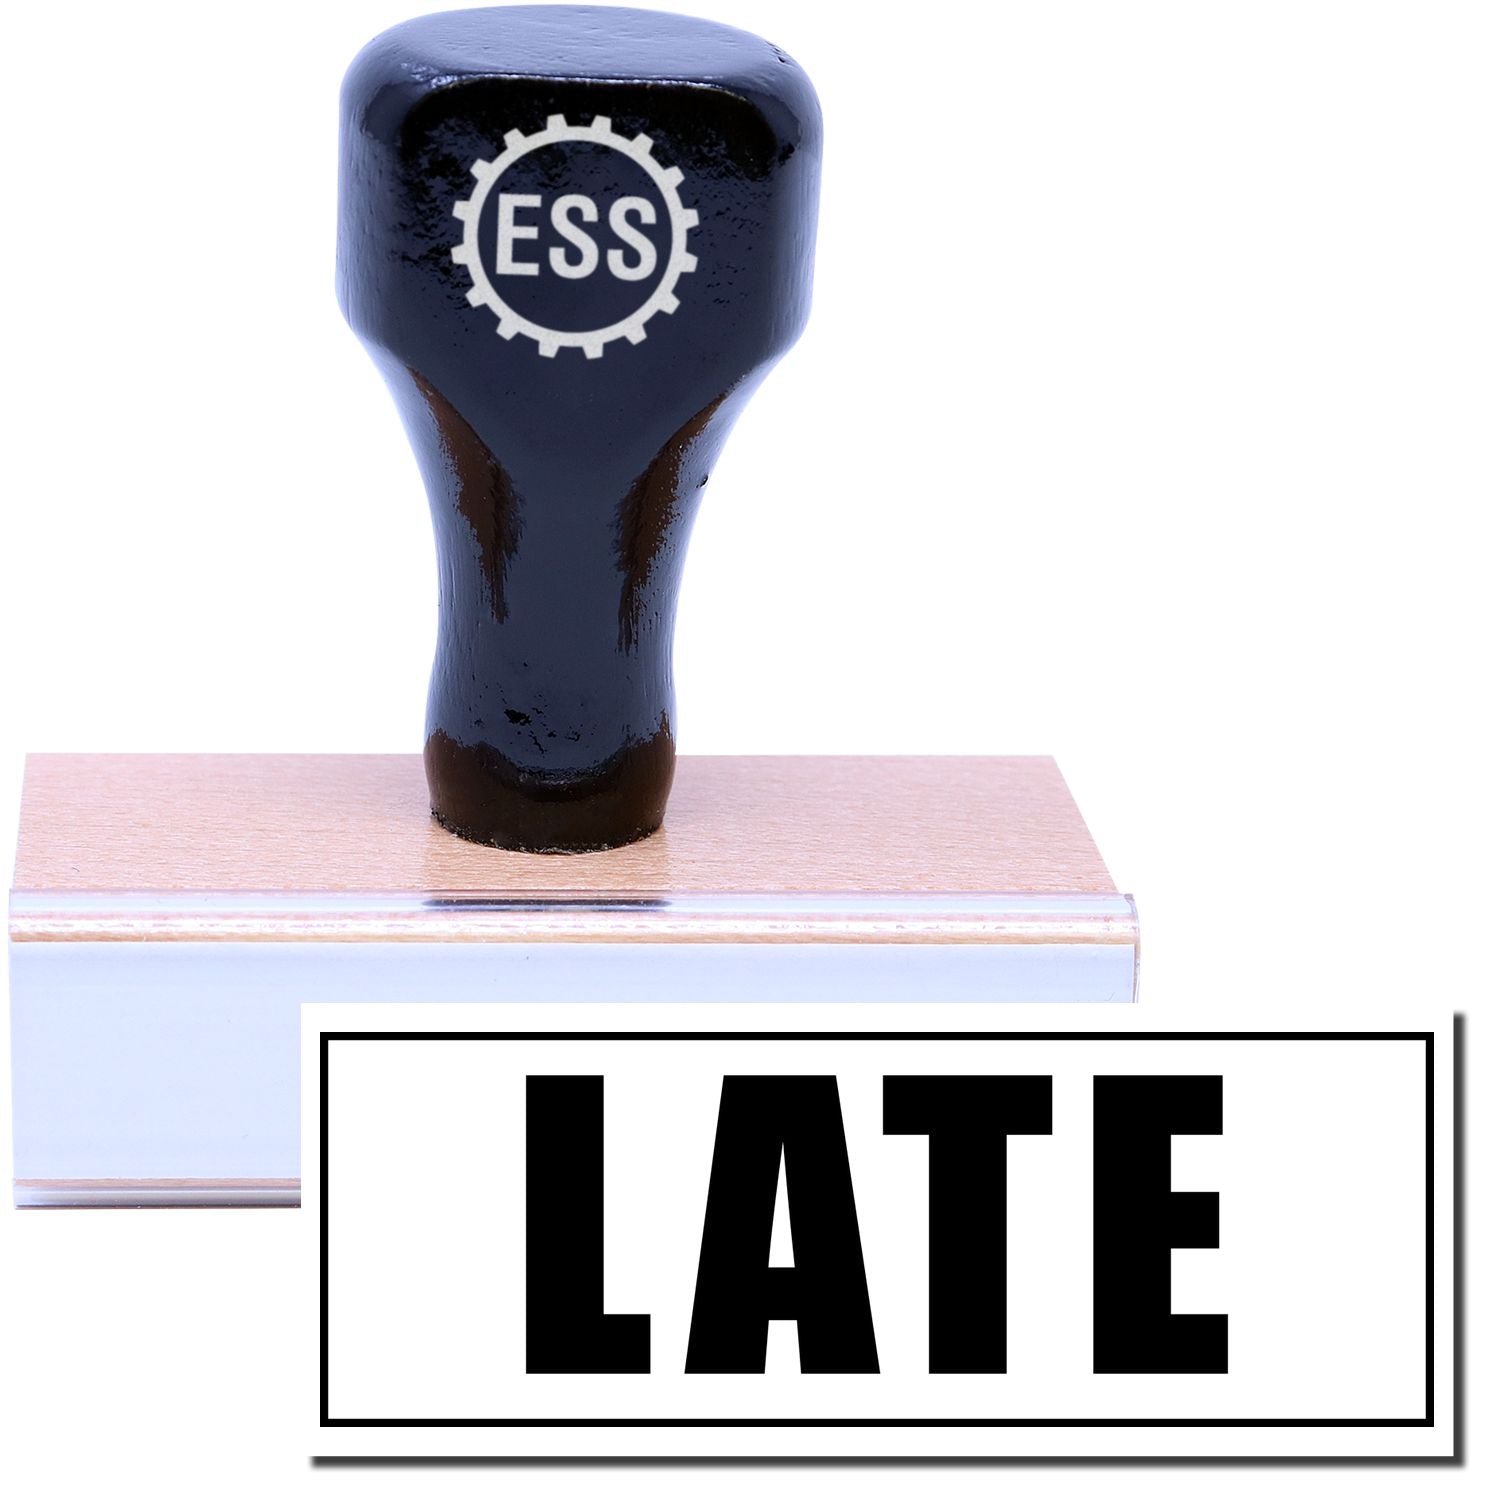 A stock office rubber stamp with a stamped image showing how the text "LATE" in a large bold font with an outline border is displayed after stamping.